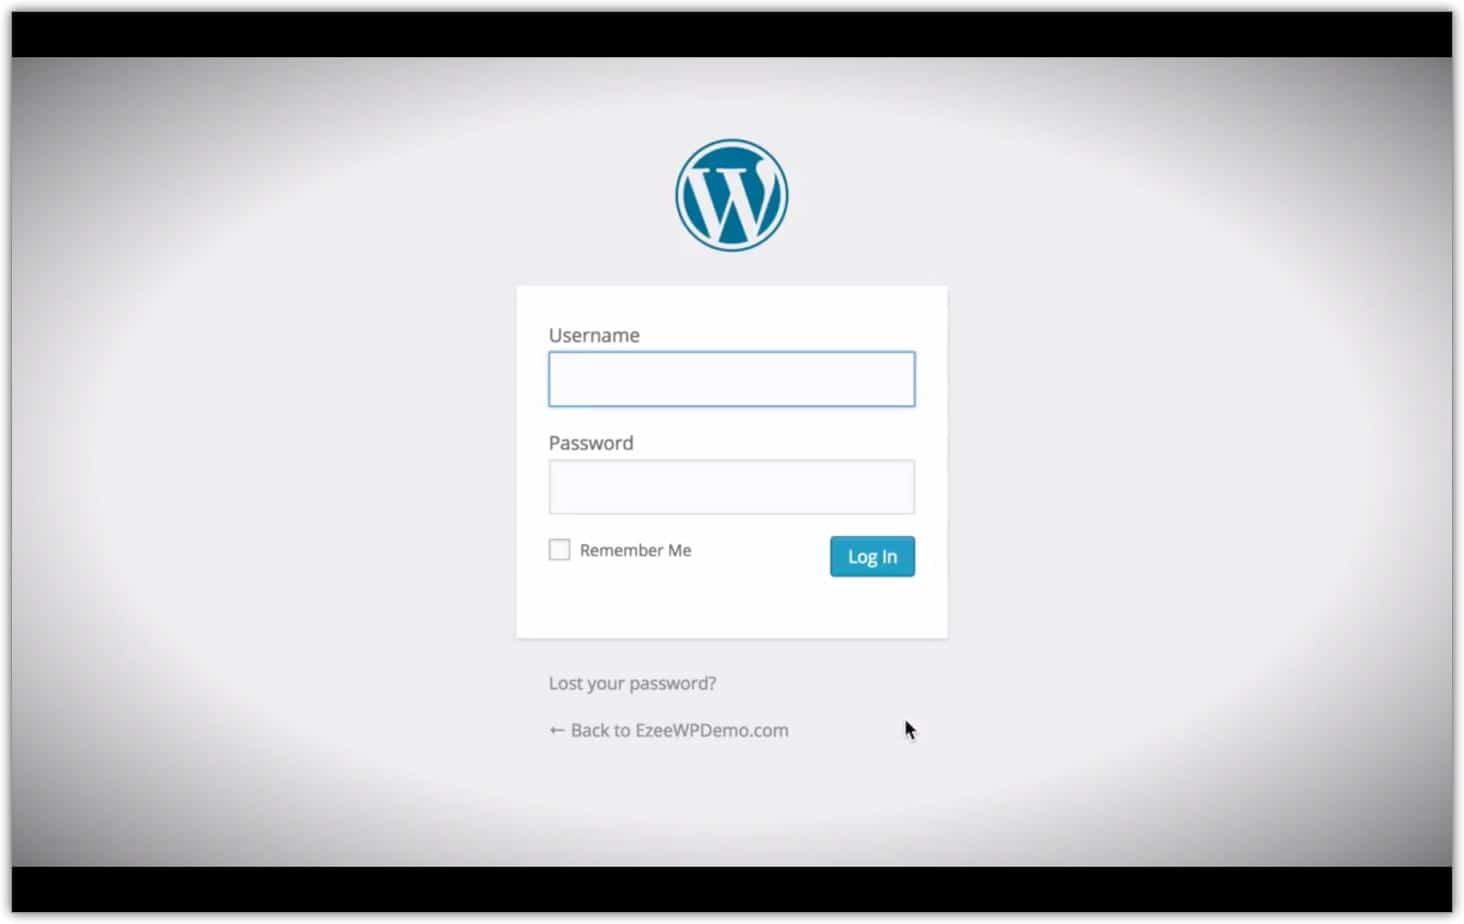 Do you want to create a website? Do you want to build a platform and spread the word out? The easiest way to do it is follow this How to set up a WordPress blog step by step tutorial!